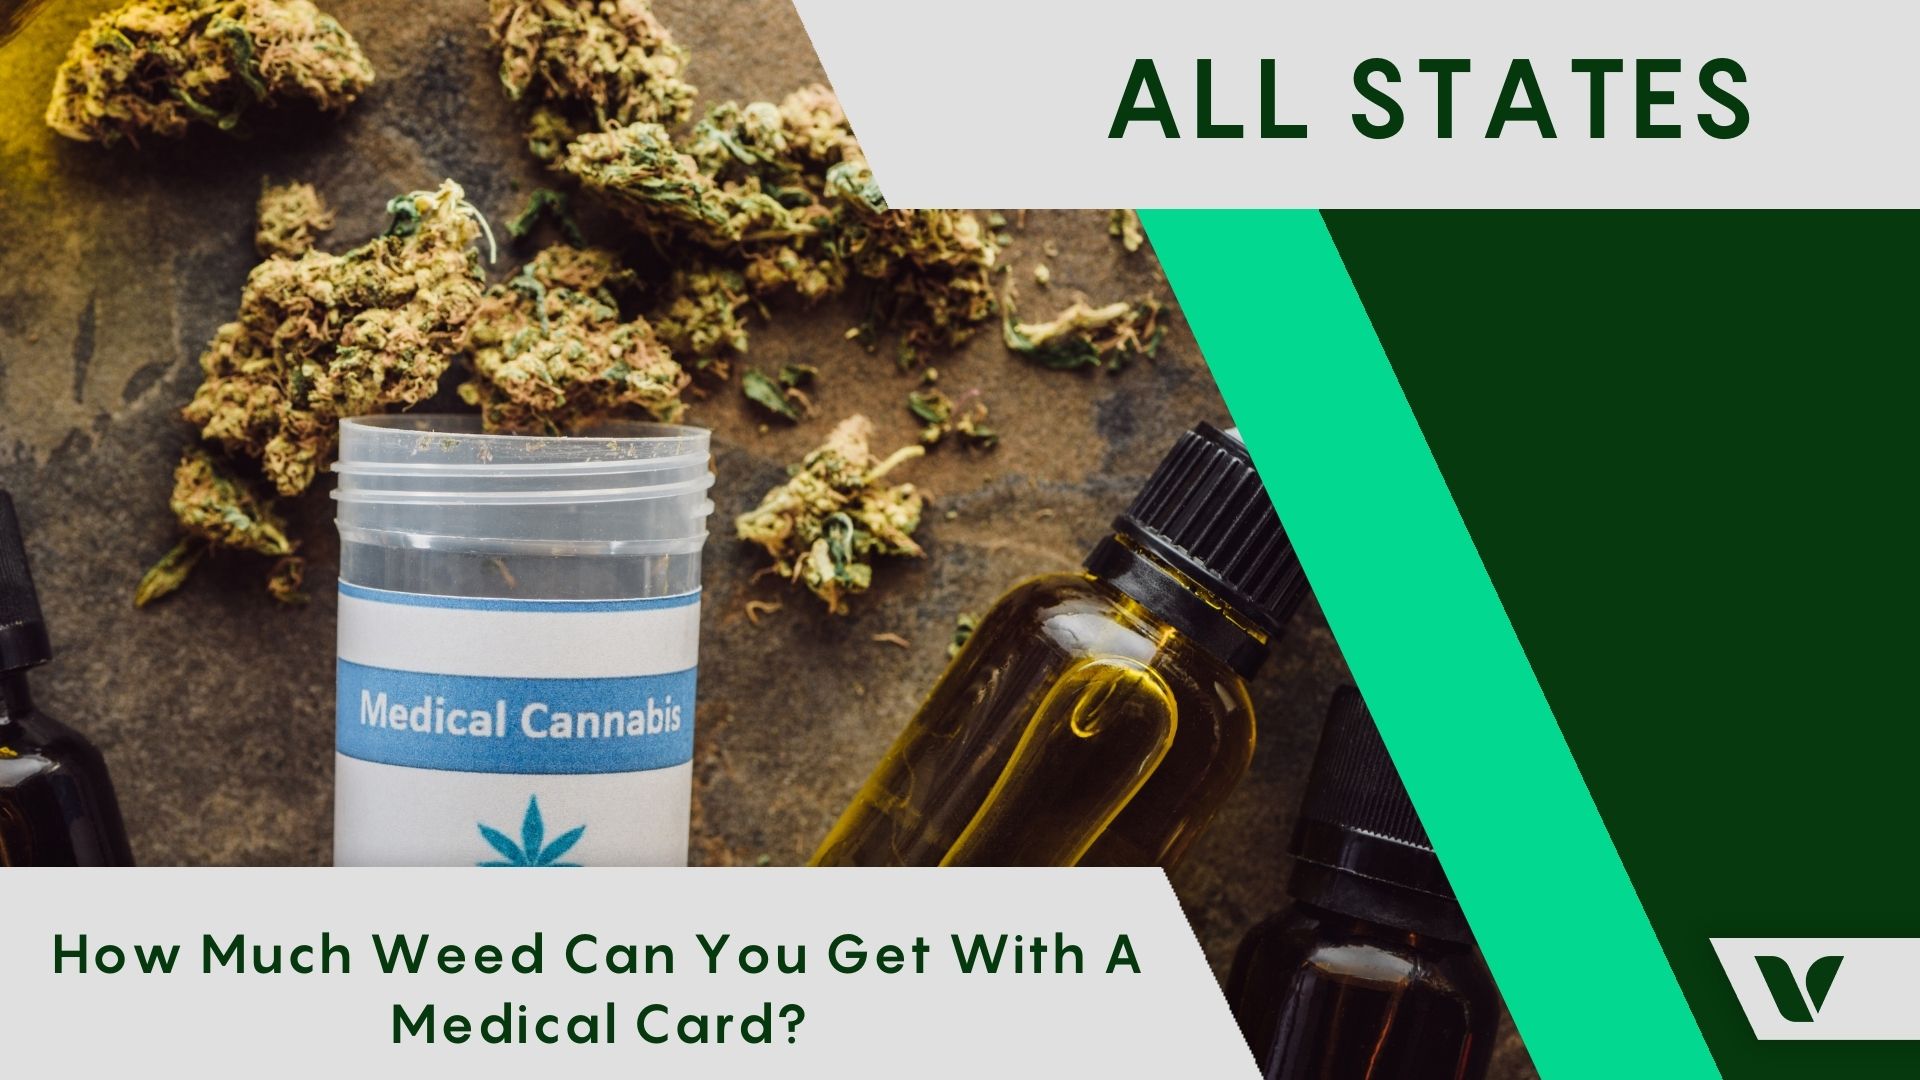 How Much Weed Can You Get With A Medical Card?